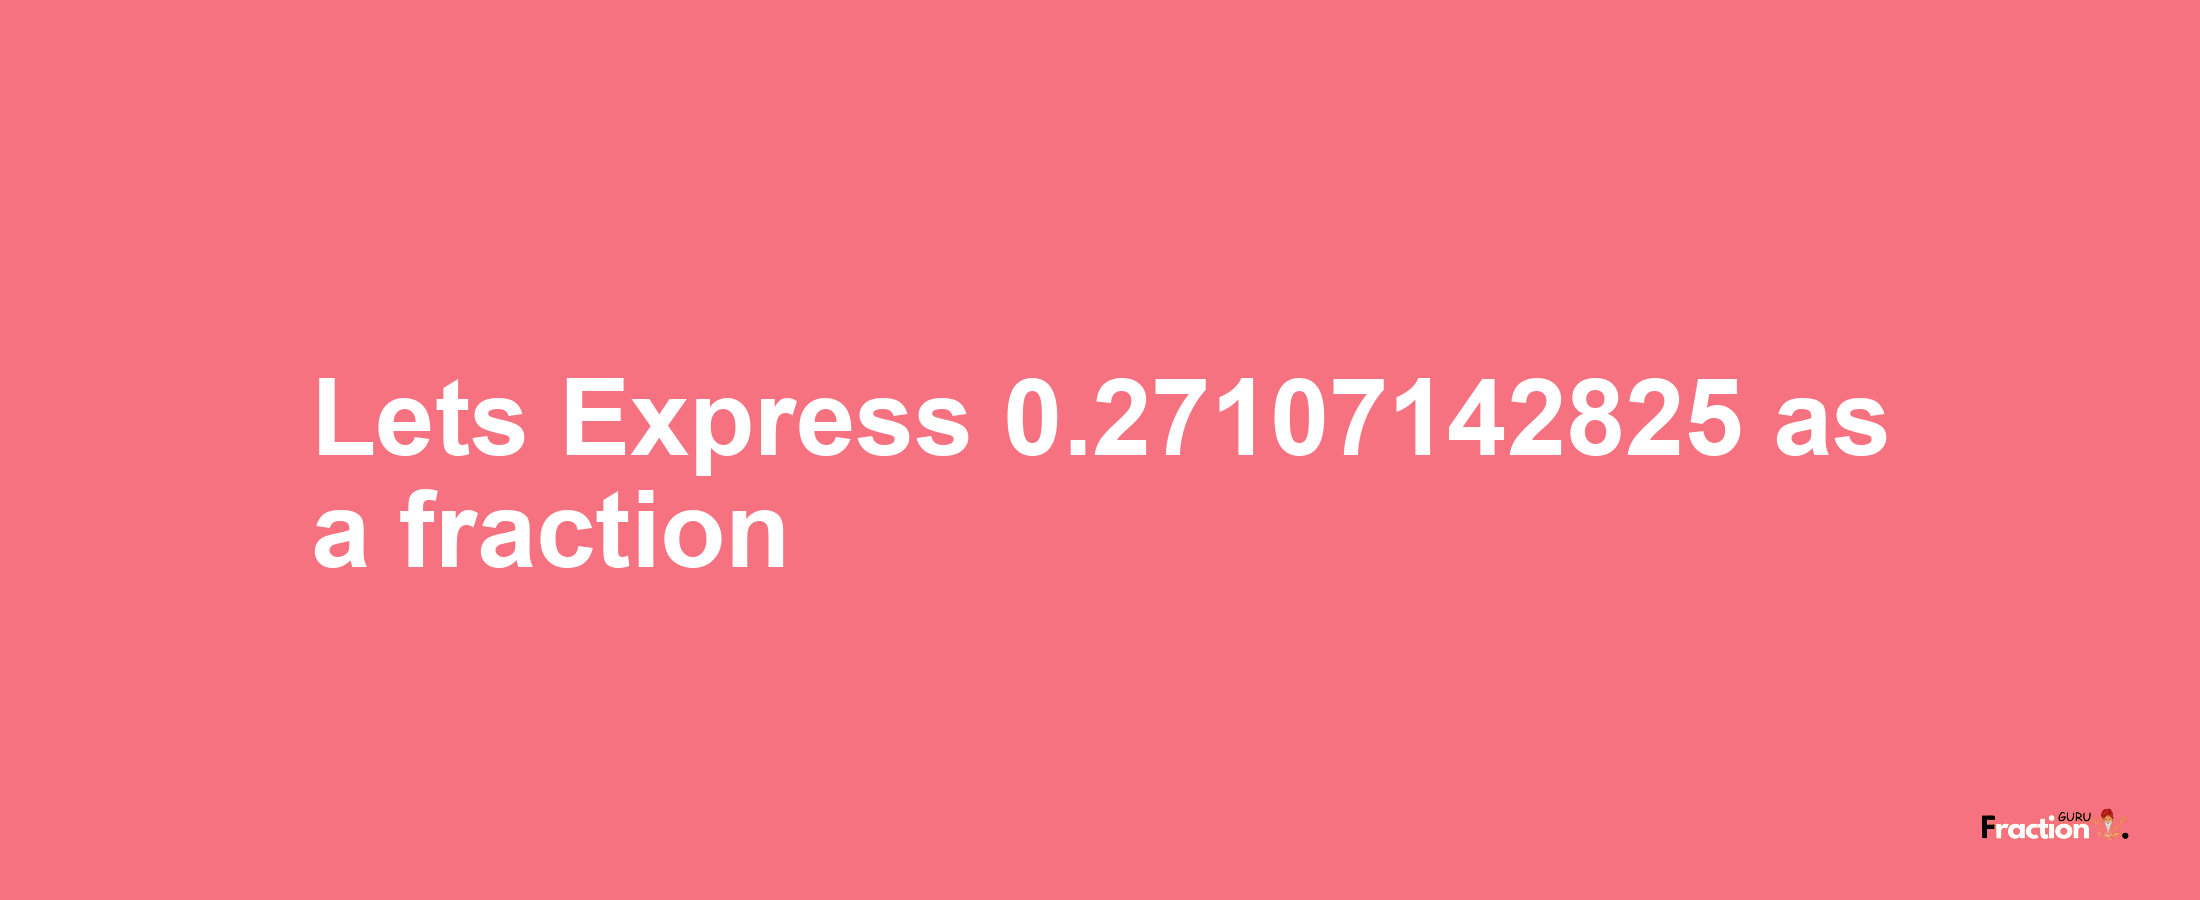 Lets Express 0.27107142825 as afraction